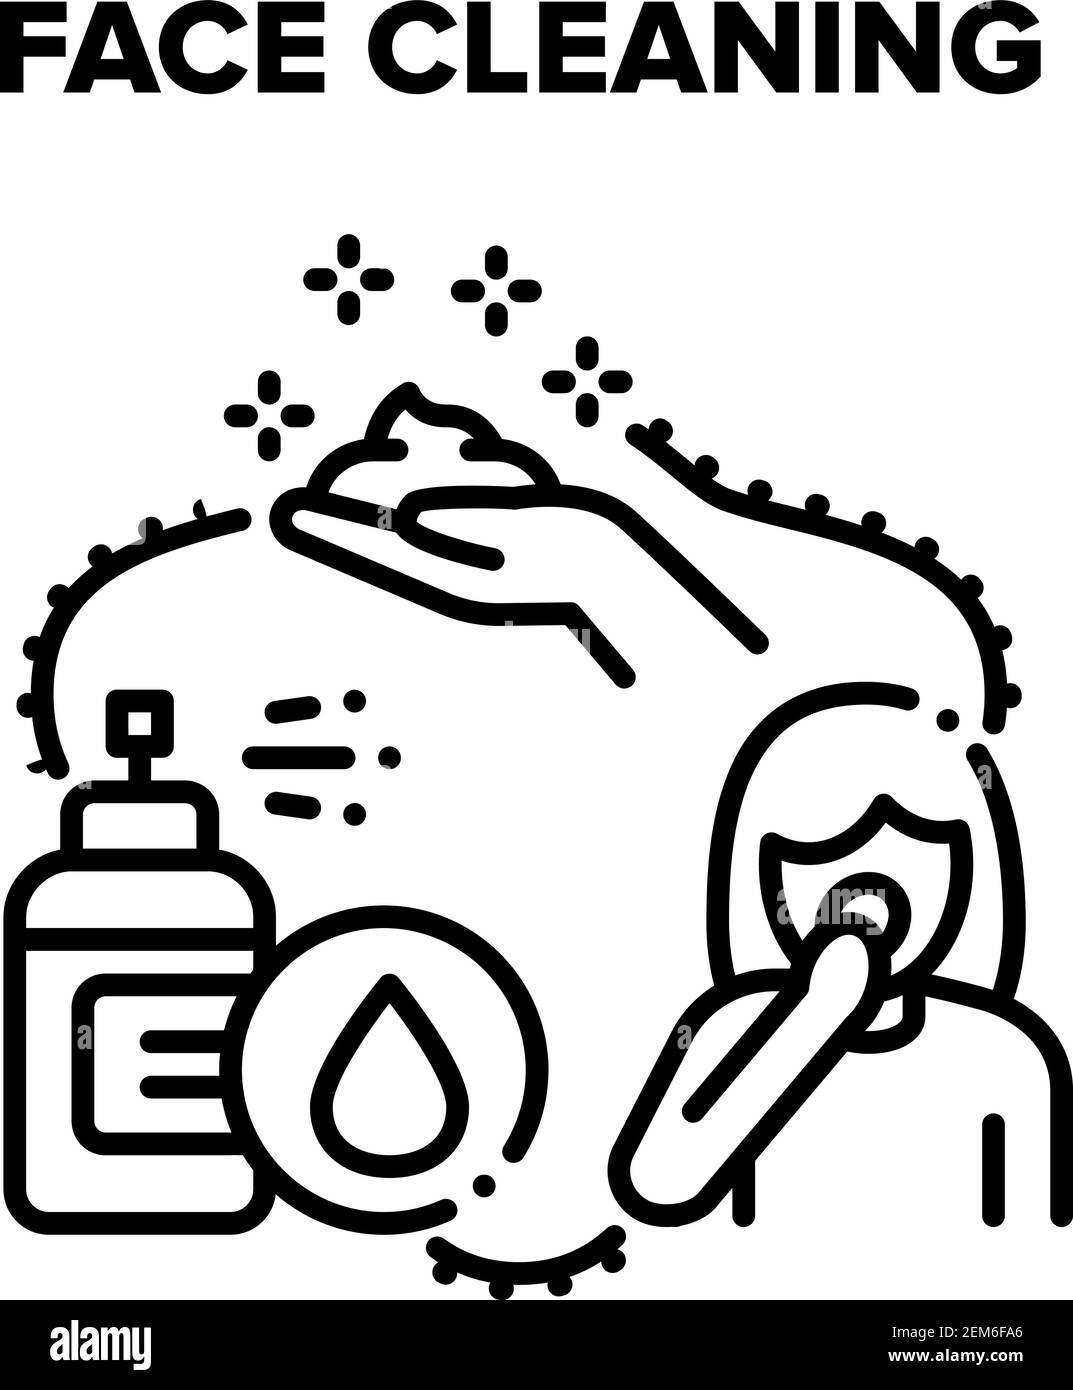 wash face clipart black and white